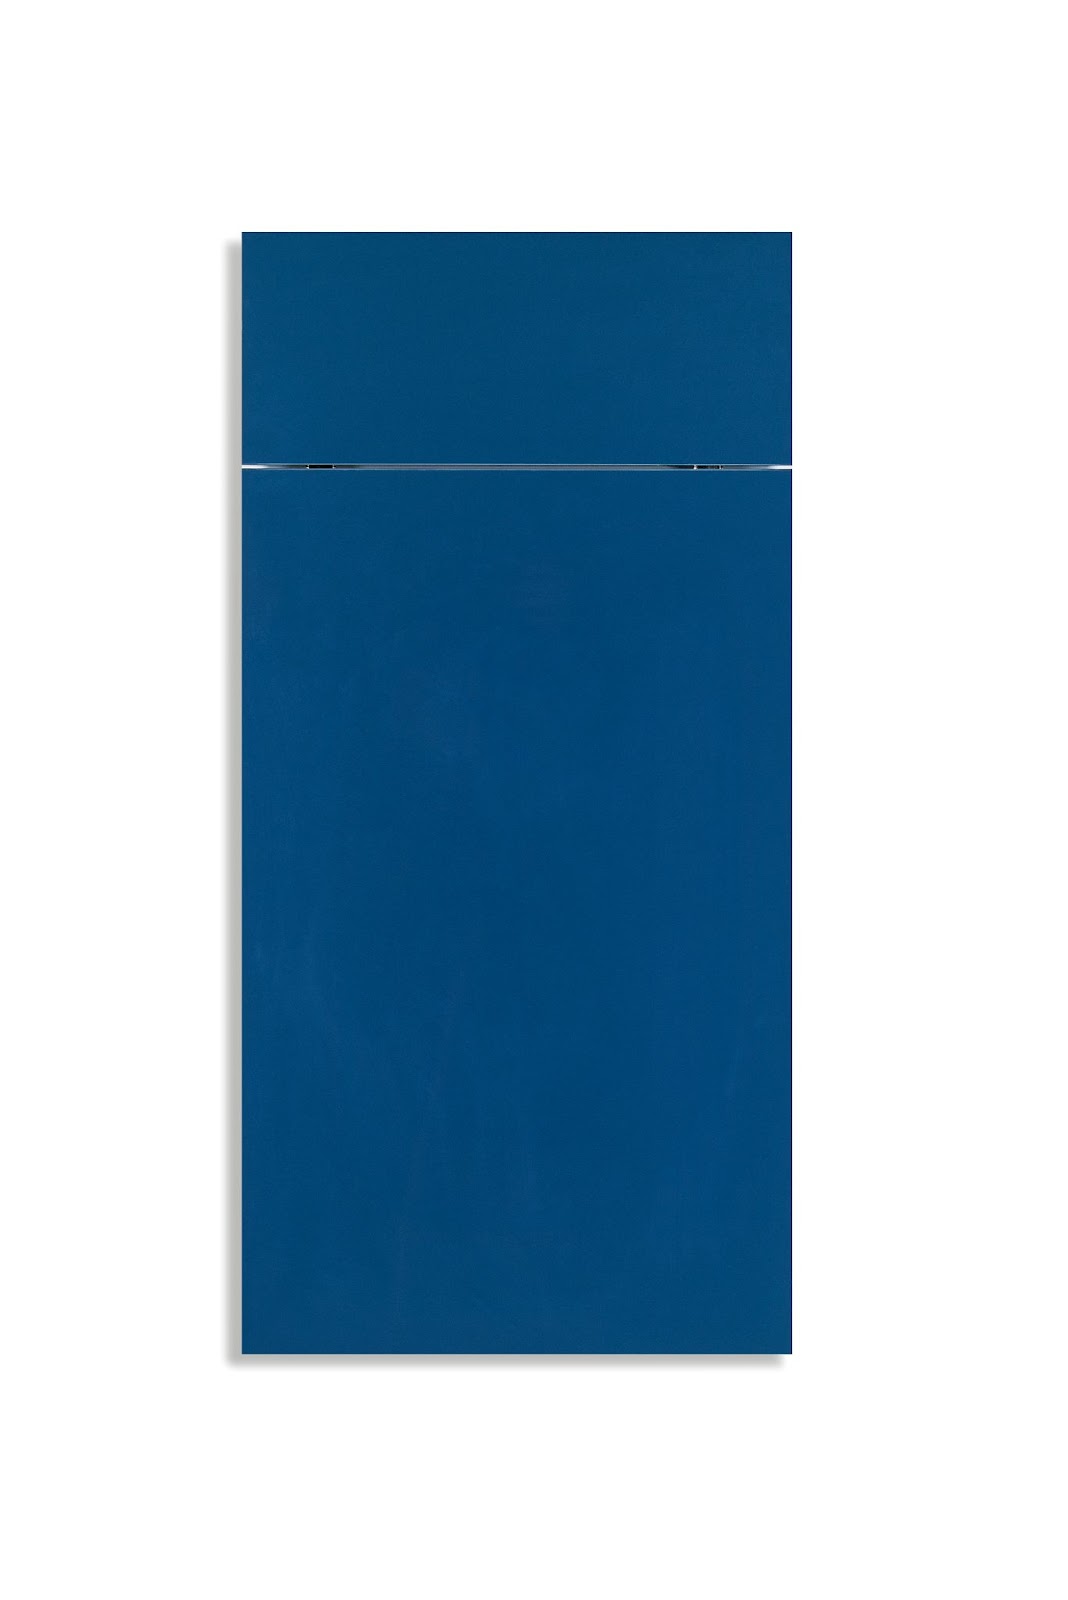 Egyptian Blue Cabinet 